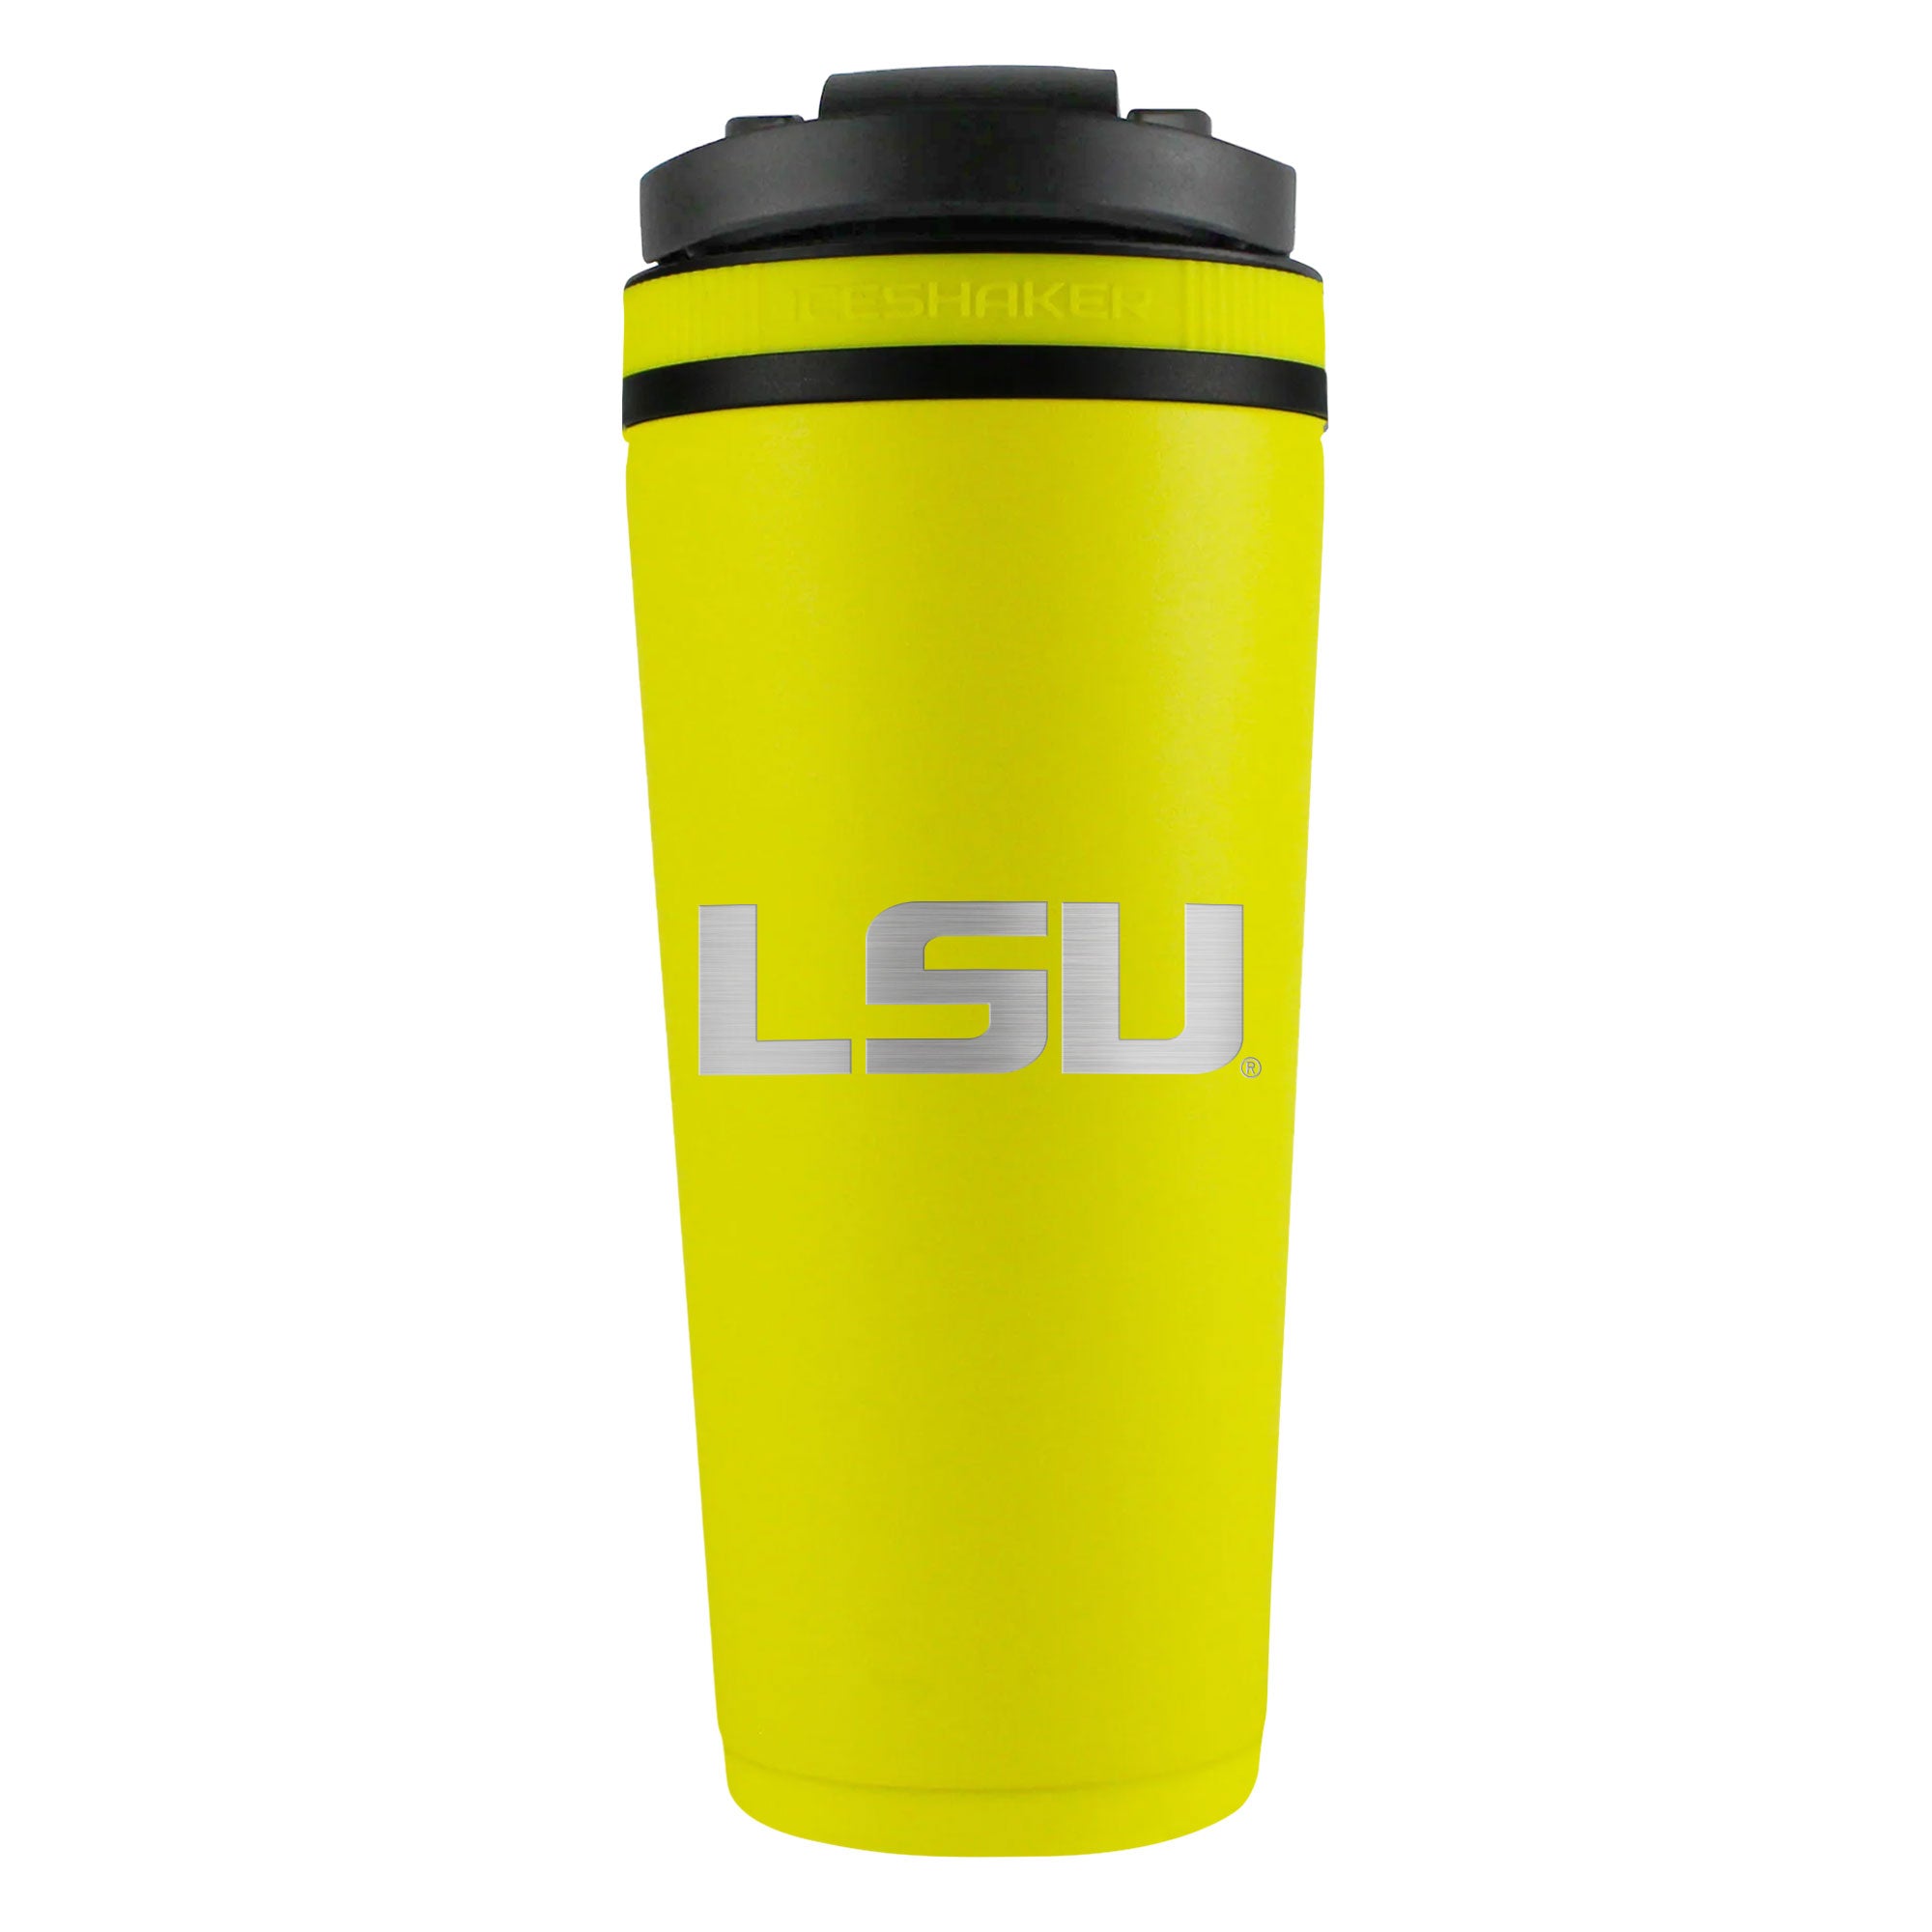 Officially Licensed Louisiana State University 26oz Ice Shaker